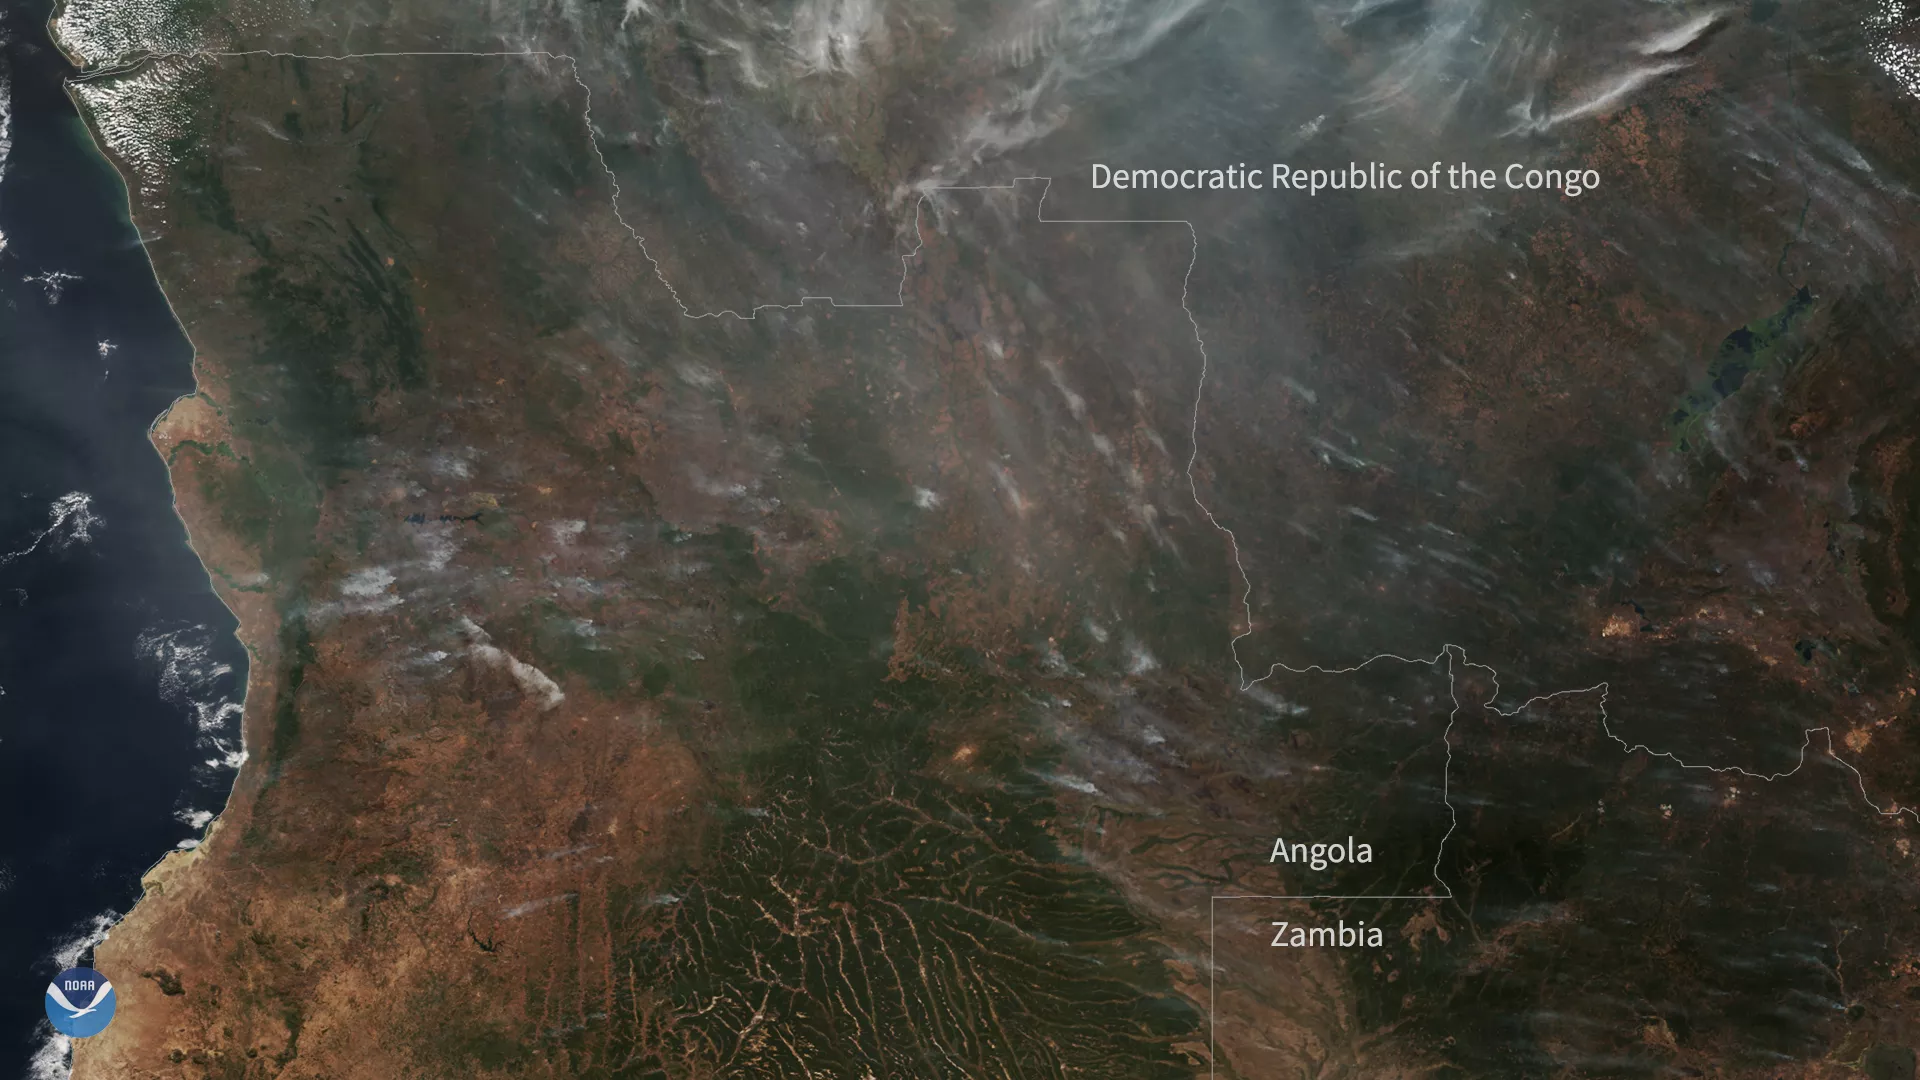 Fires burning in Central Africa